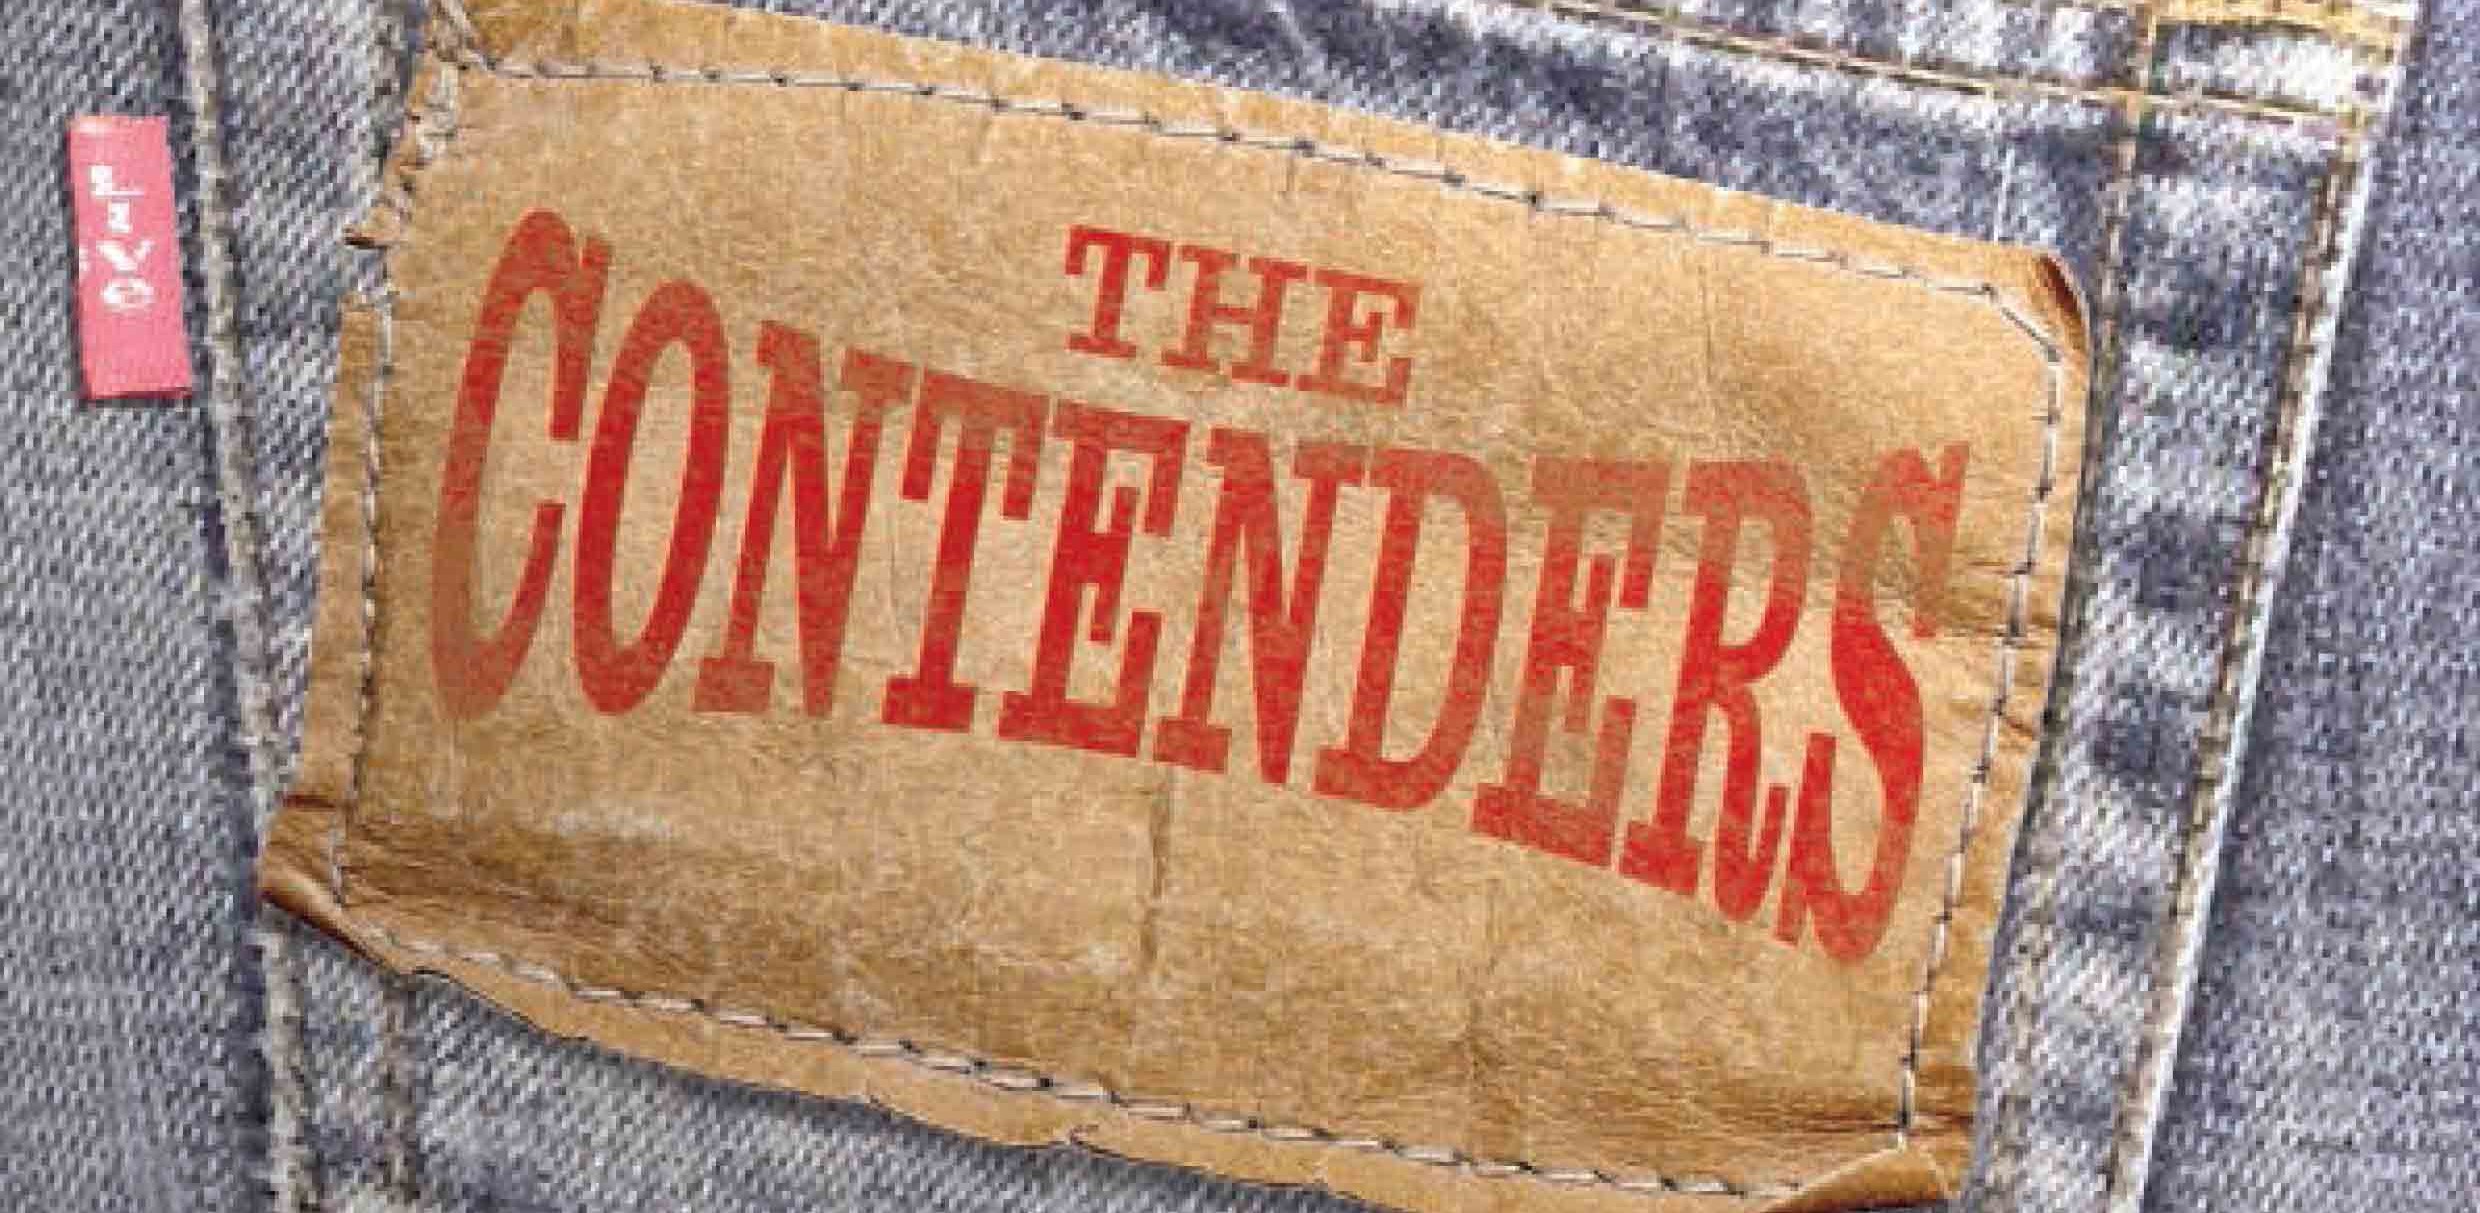 Sunday In The Bar - The Contenders